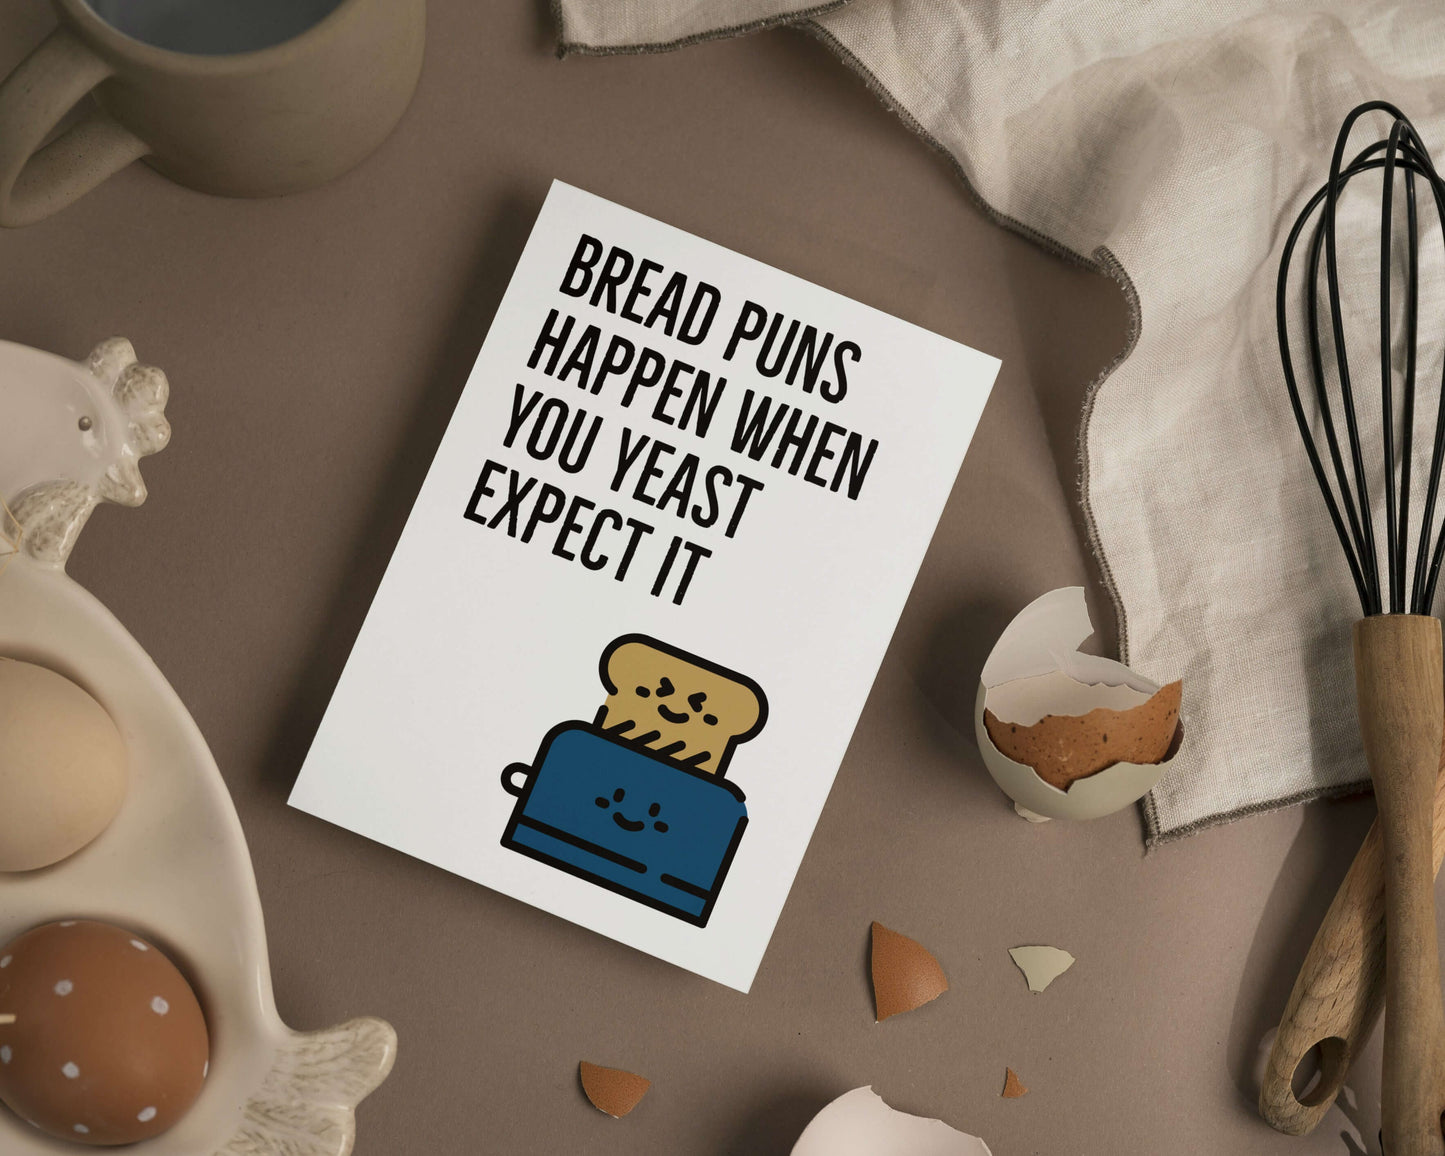 The Card Store UK's Bread Puns Happen When You Yeast Expect It | Funny Bread Pun Everyday Card | Blank Bread Pun Baker Funny General Greeting Card, General Cards for £3.50 each